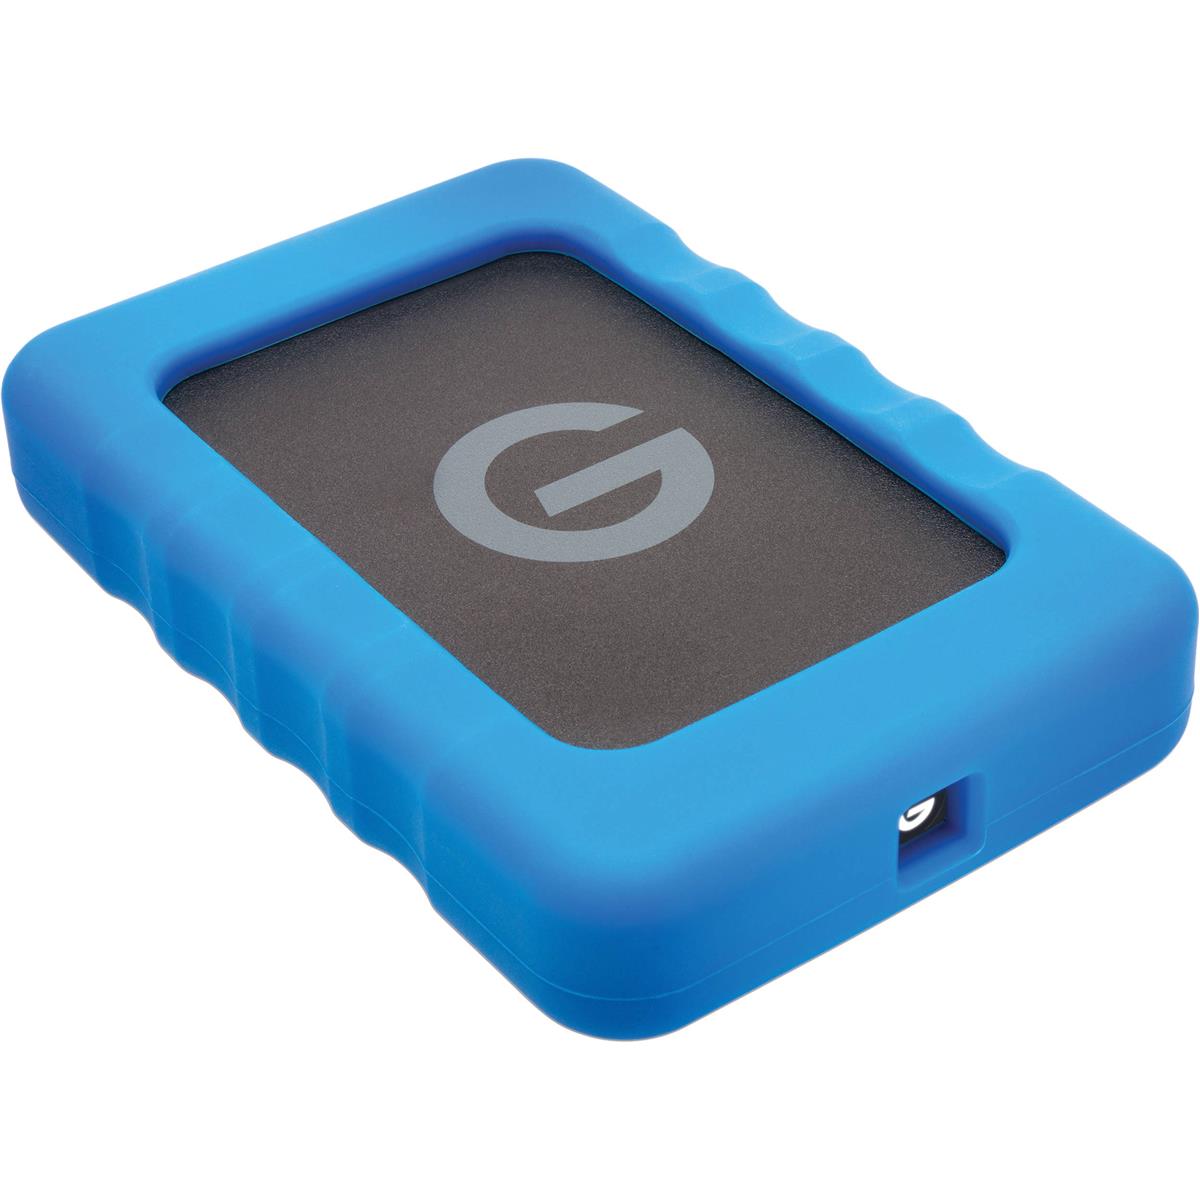 Image of G-Technology G-DRIVE ev RaW 500GB USB 3.0 External SSD with Rugged Bumper